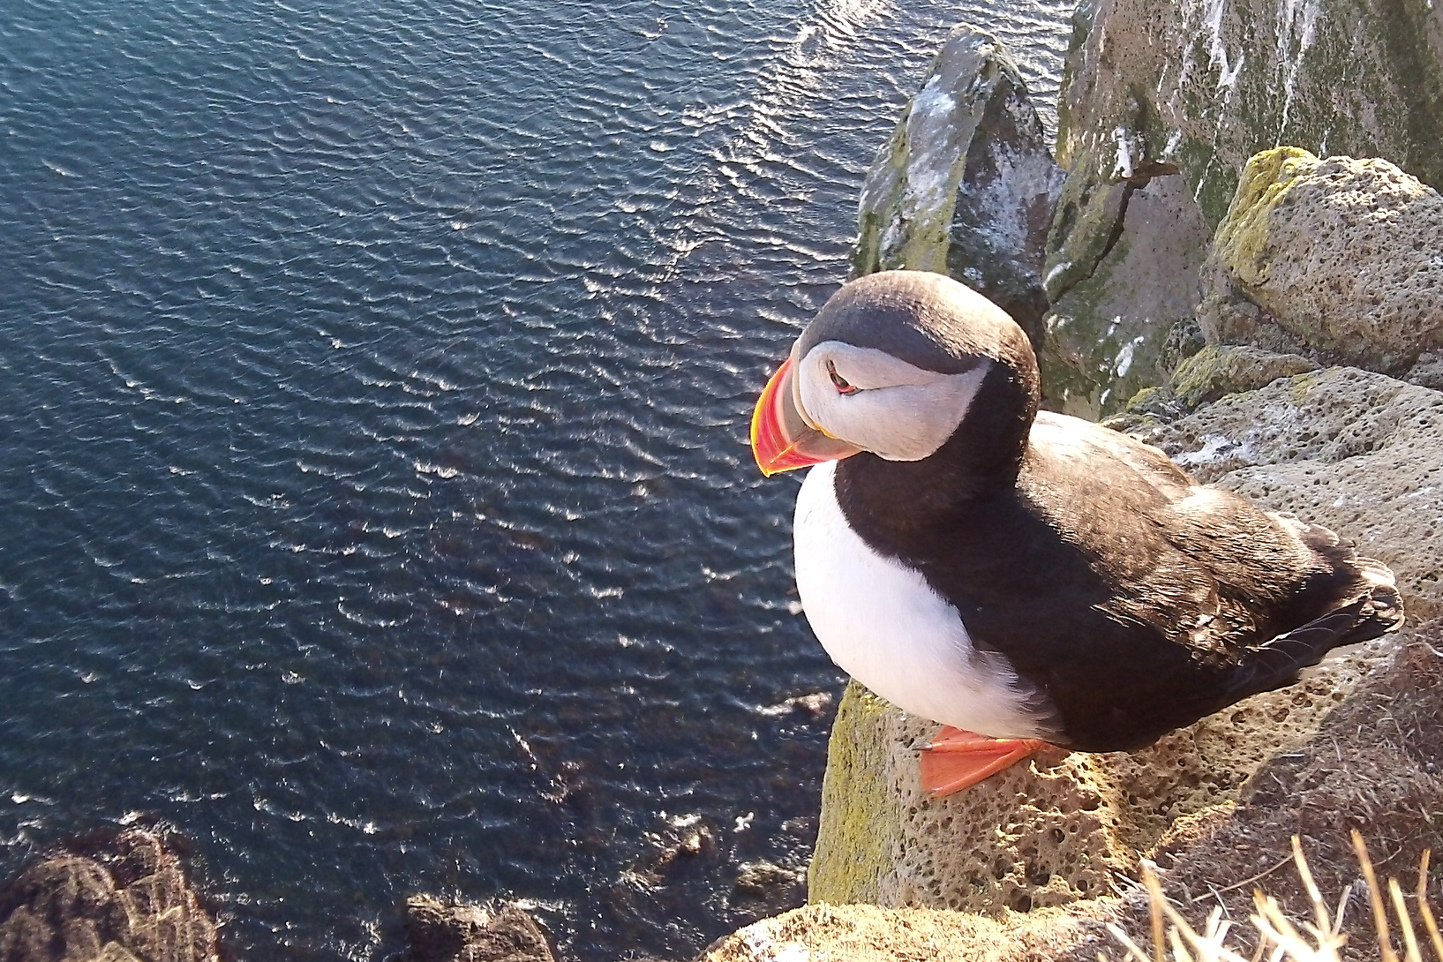 A puffin in West Iceland. Image by Mr Hicks46 / CC BY-SA 2.0